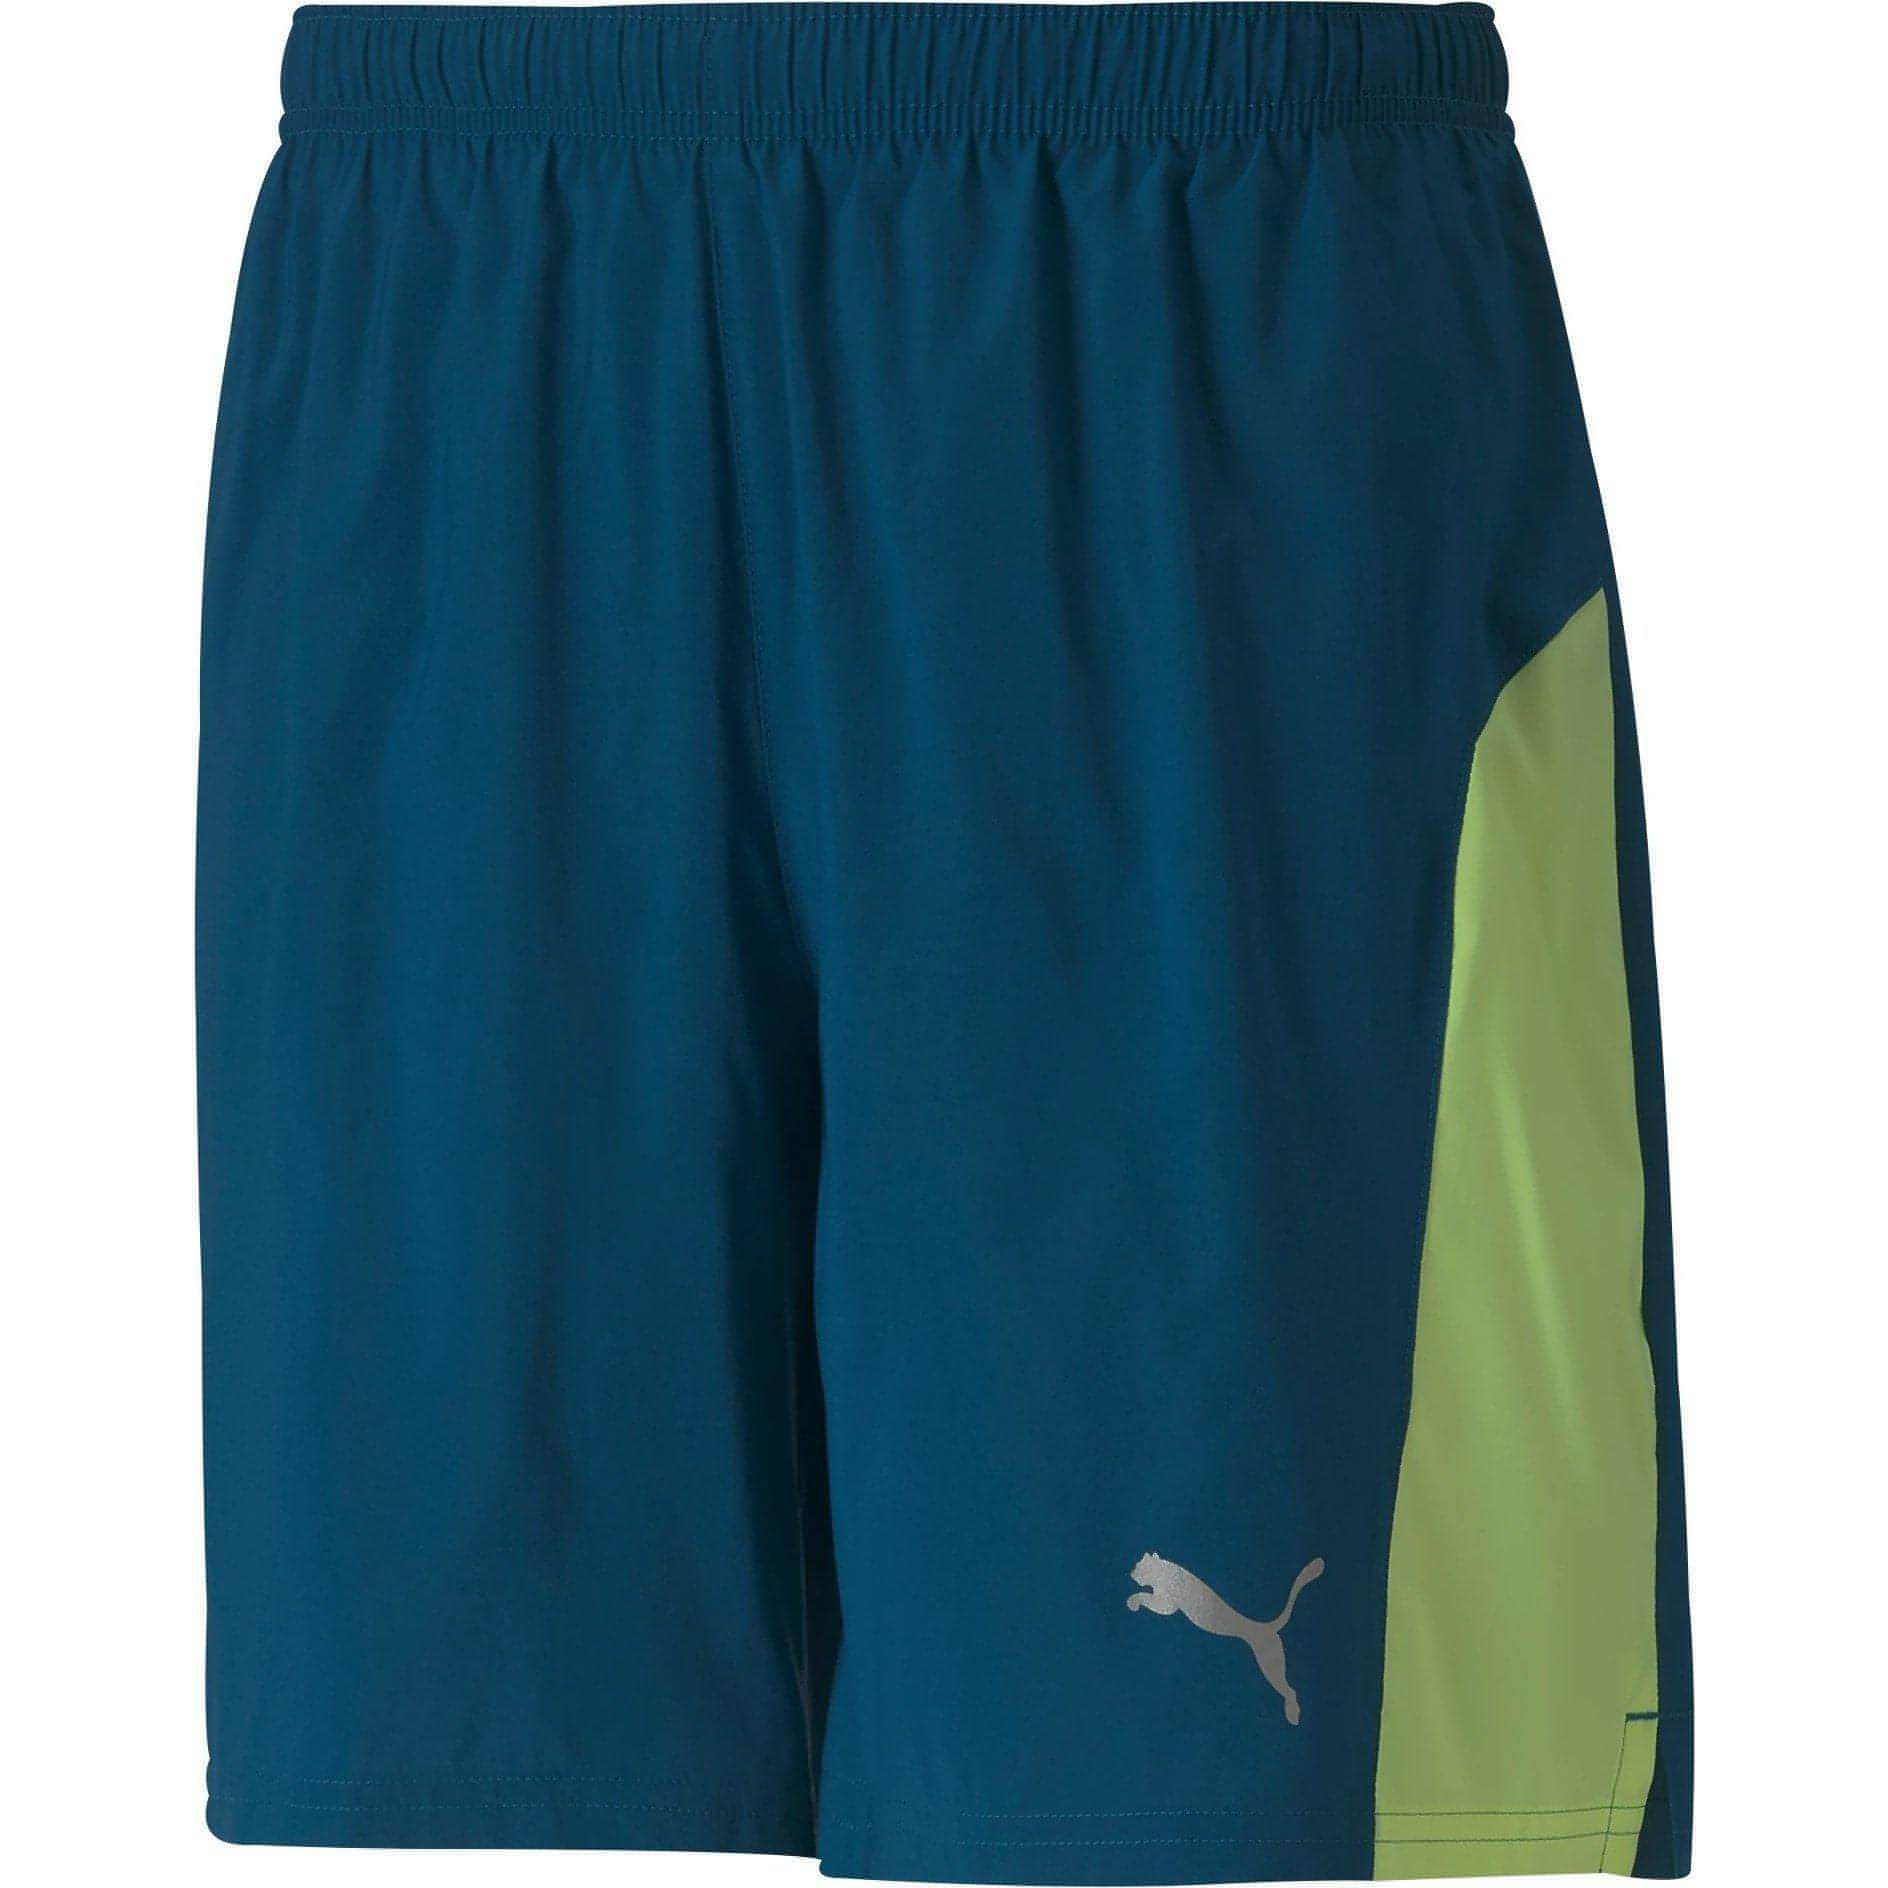 Puma Favourite Woven Session 7 Inch Mens Running Shorts - Blue - Start Fitness